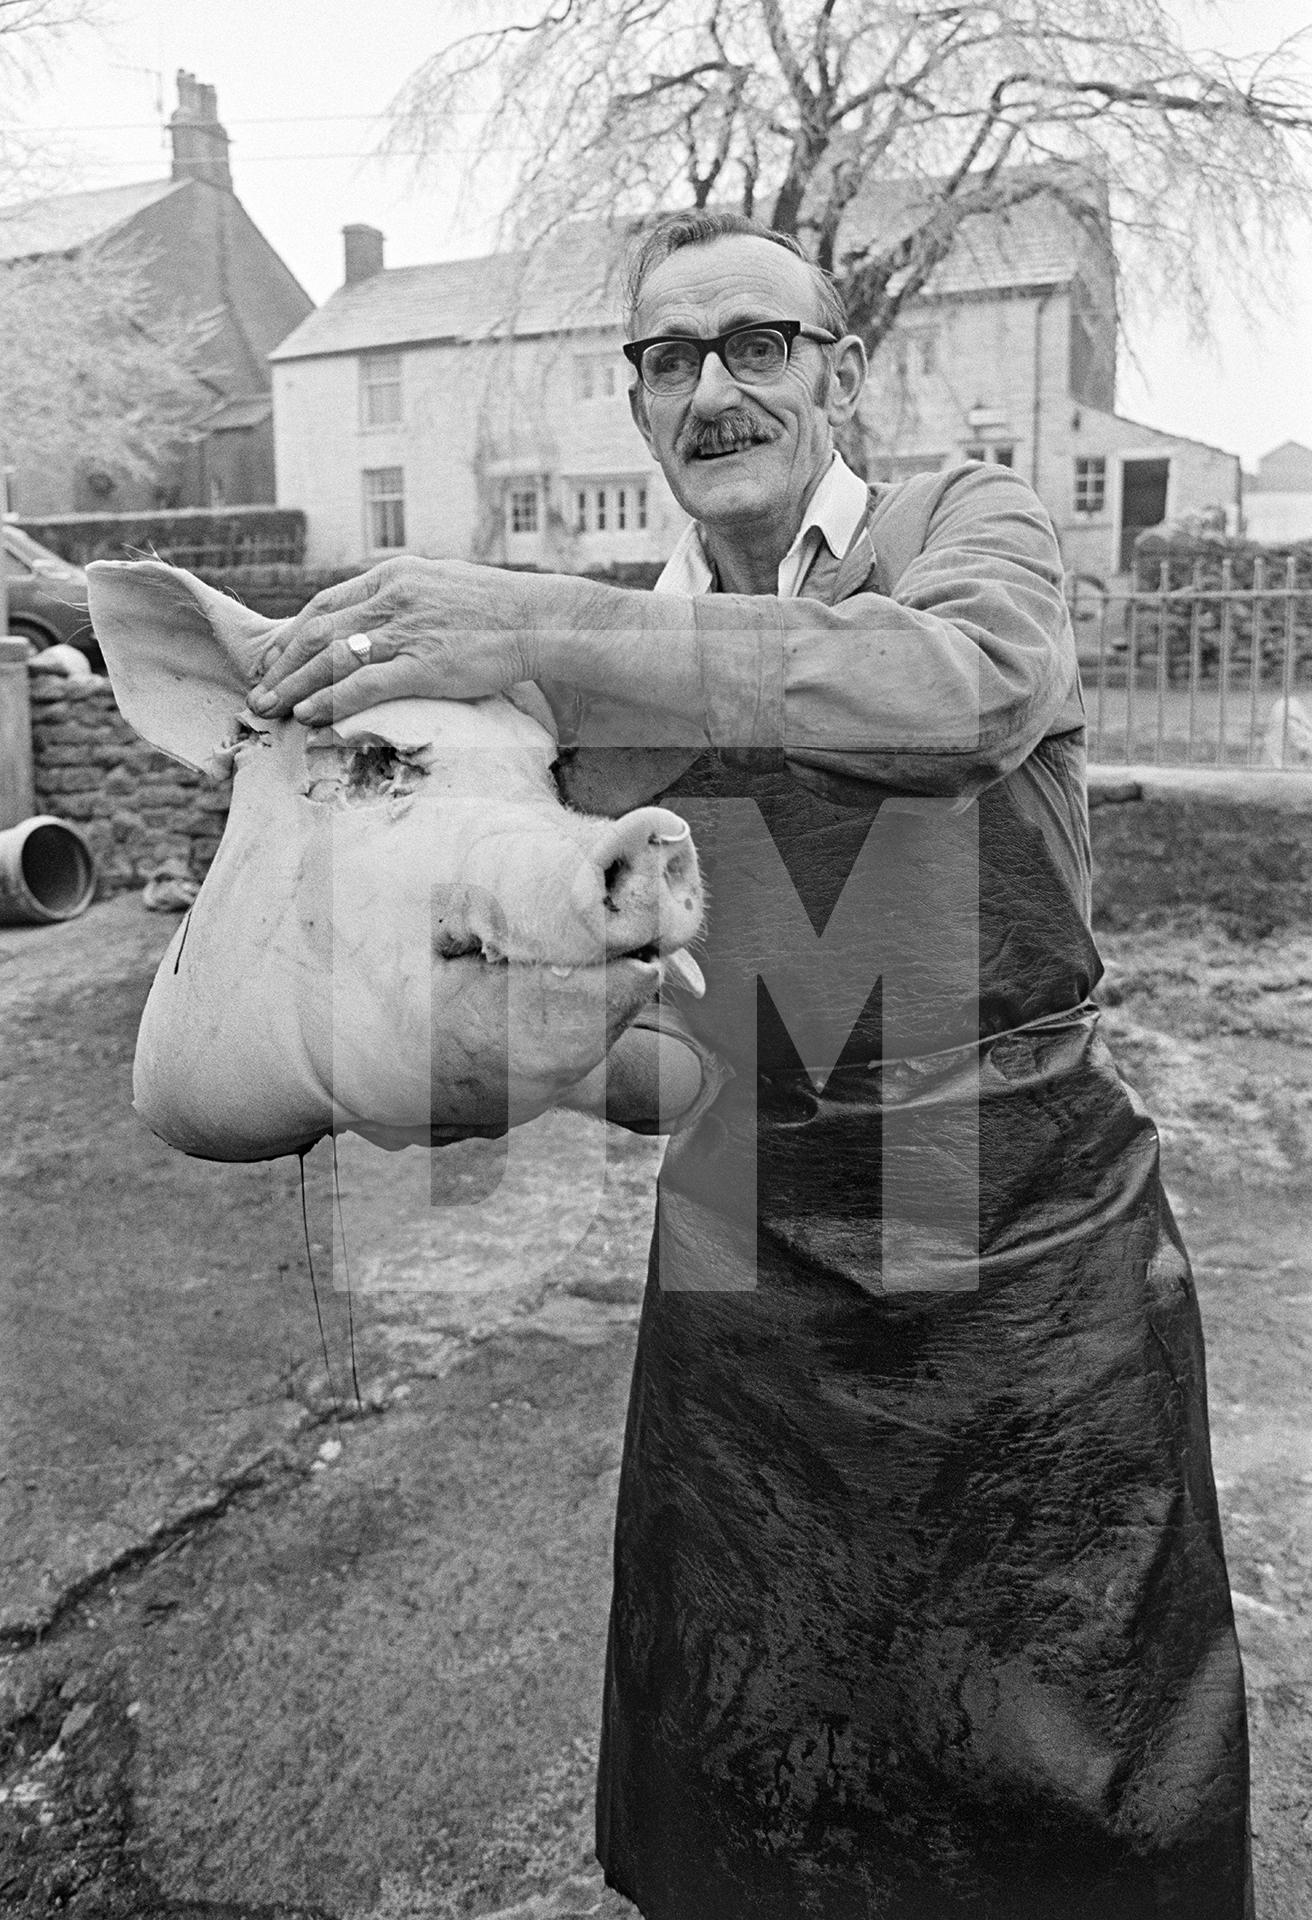 Butcher’s assistant Jim Woodhouse with the pig’s head. North Yorkshire 1976 by Daniel Meadows